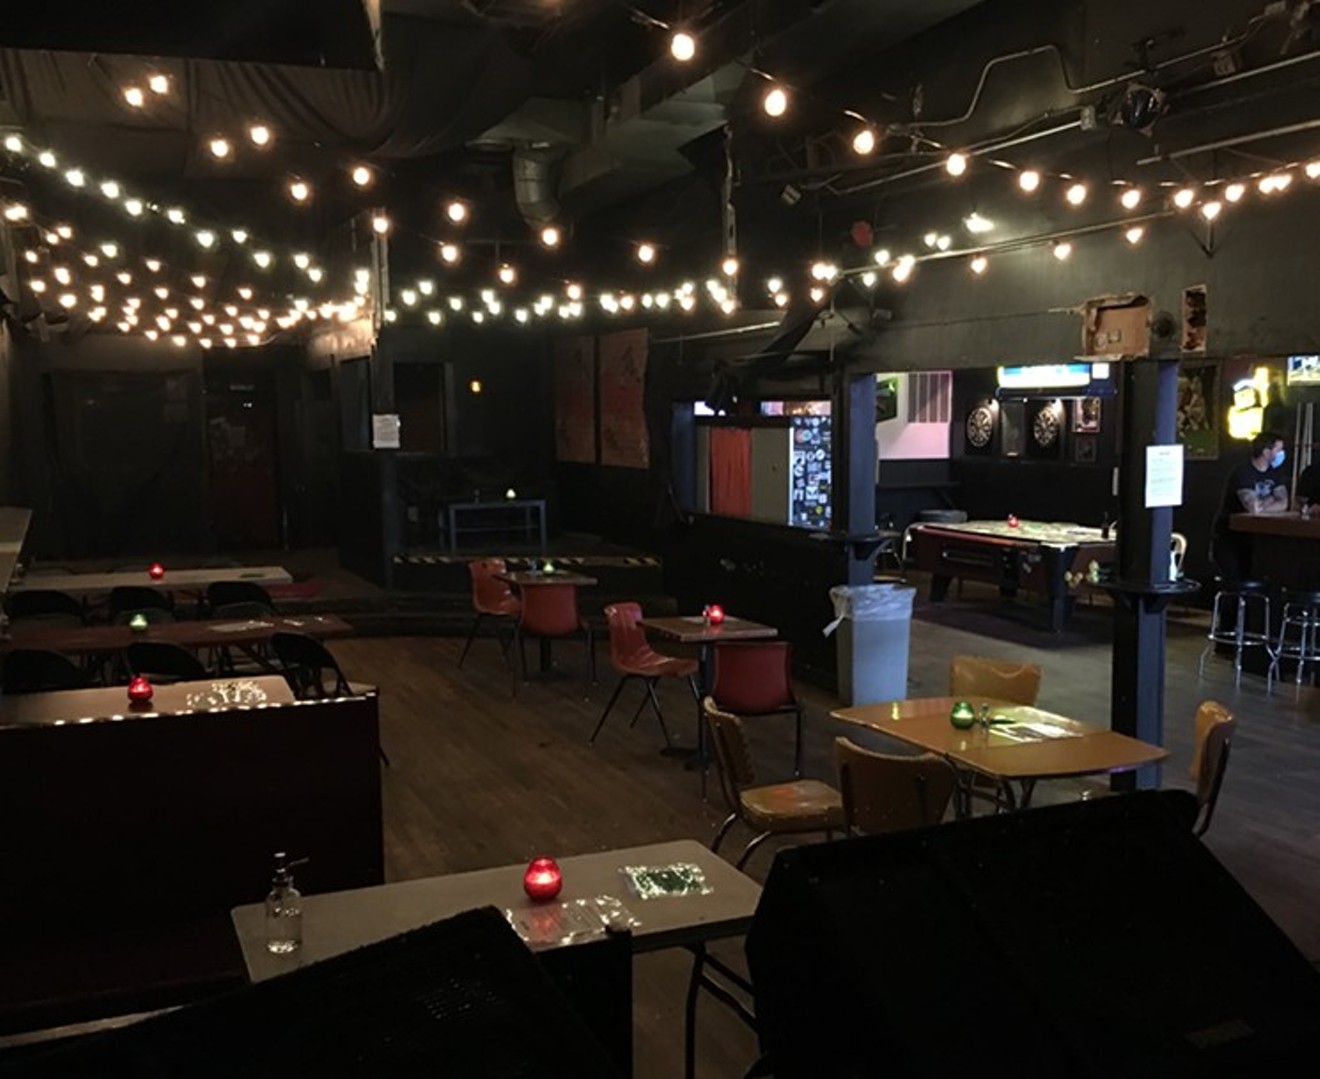 Venues like the hi-dive can apply for the Shuttered Venue Operators Grant starting April 8.